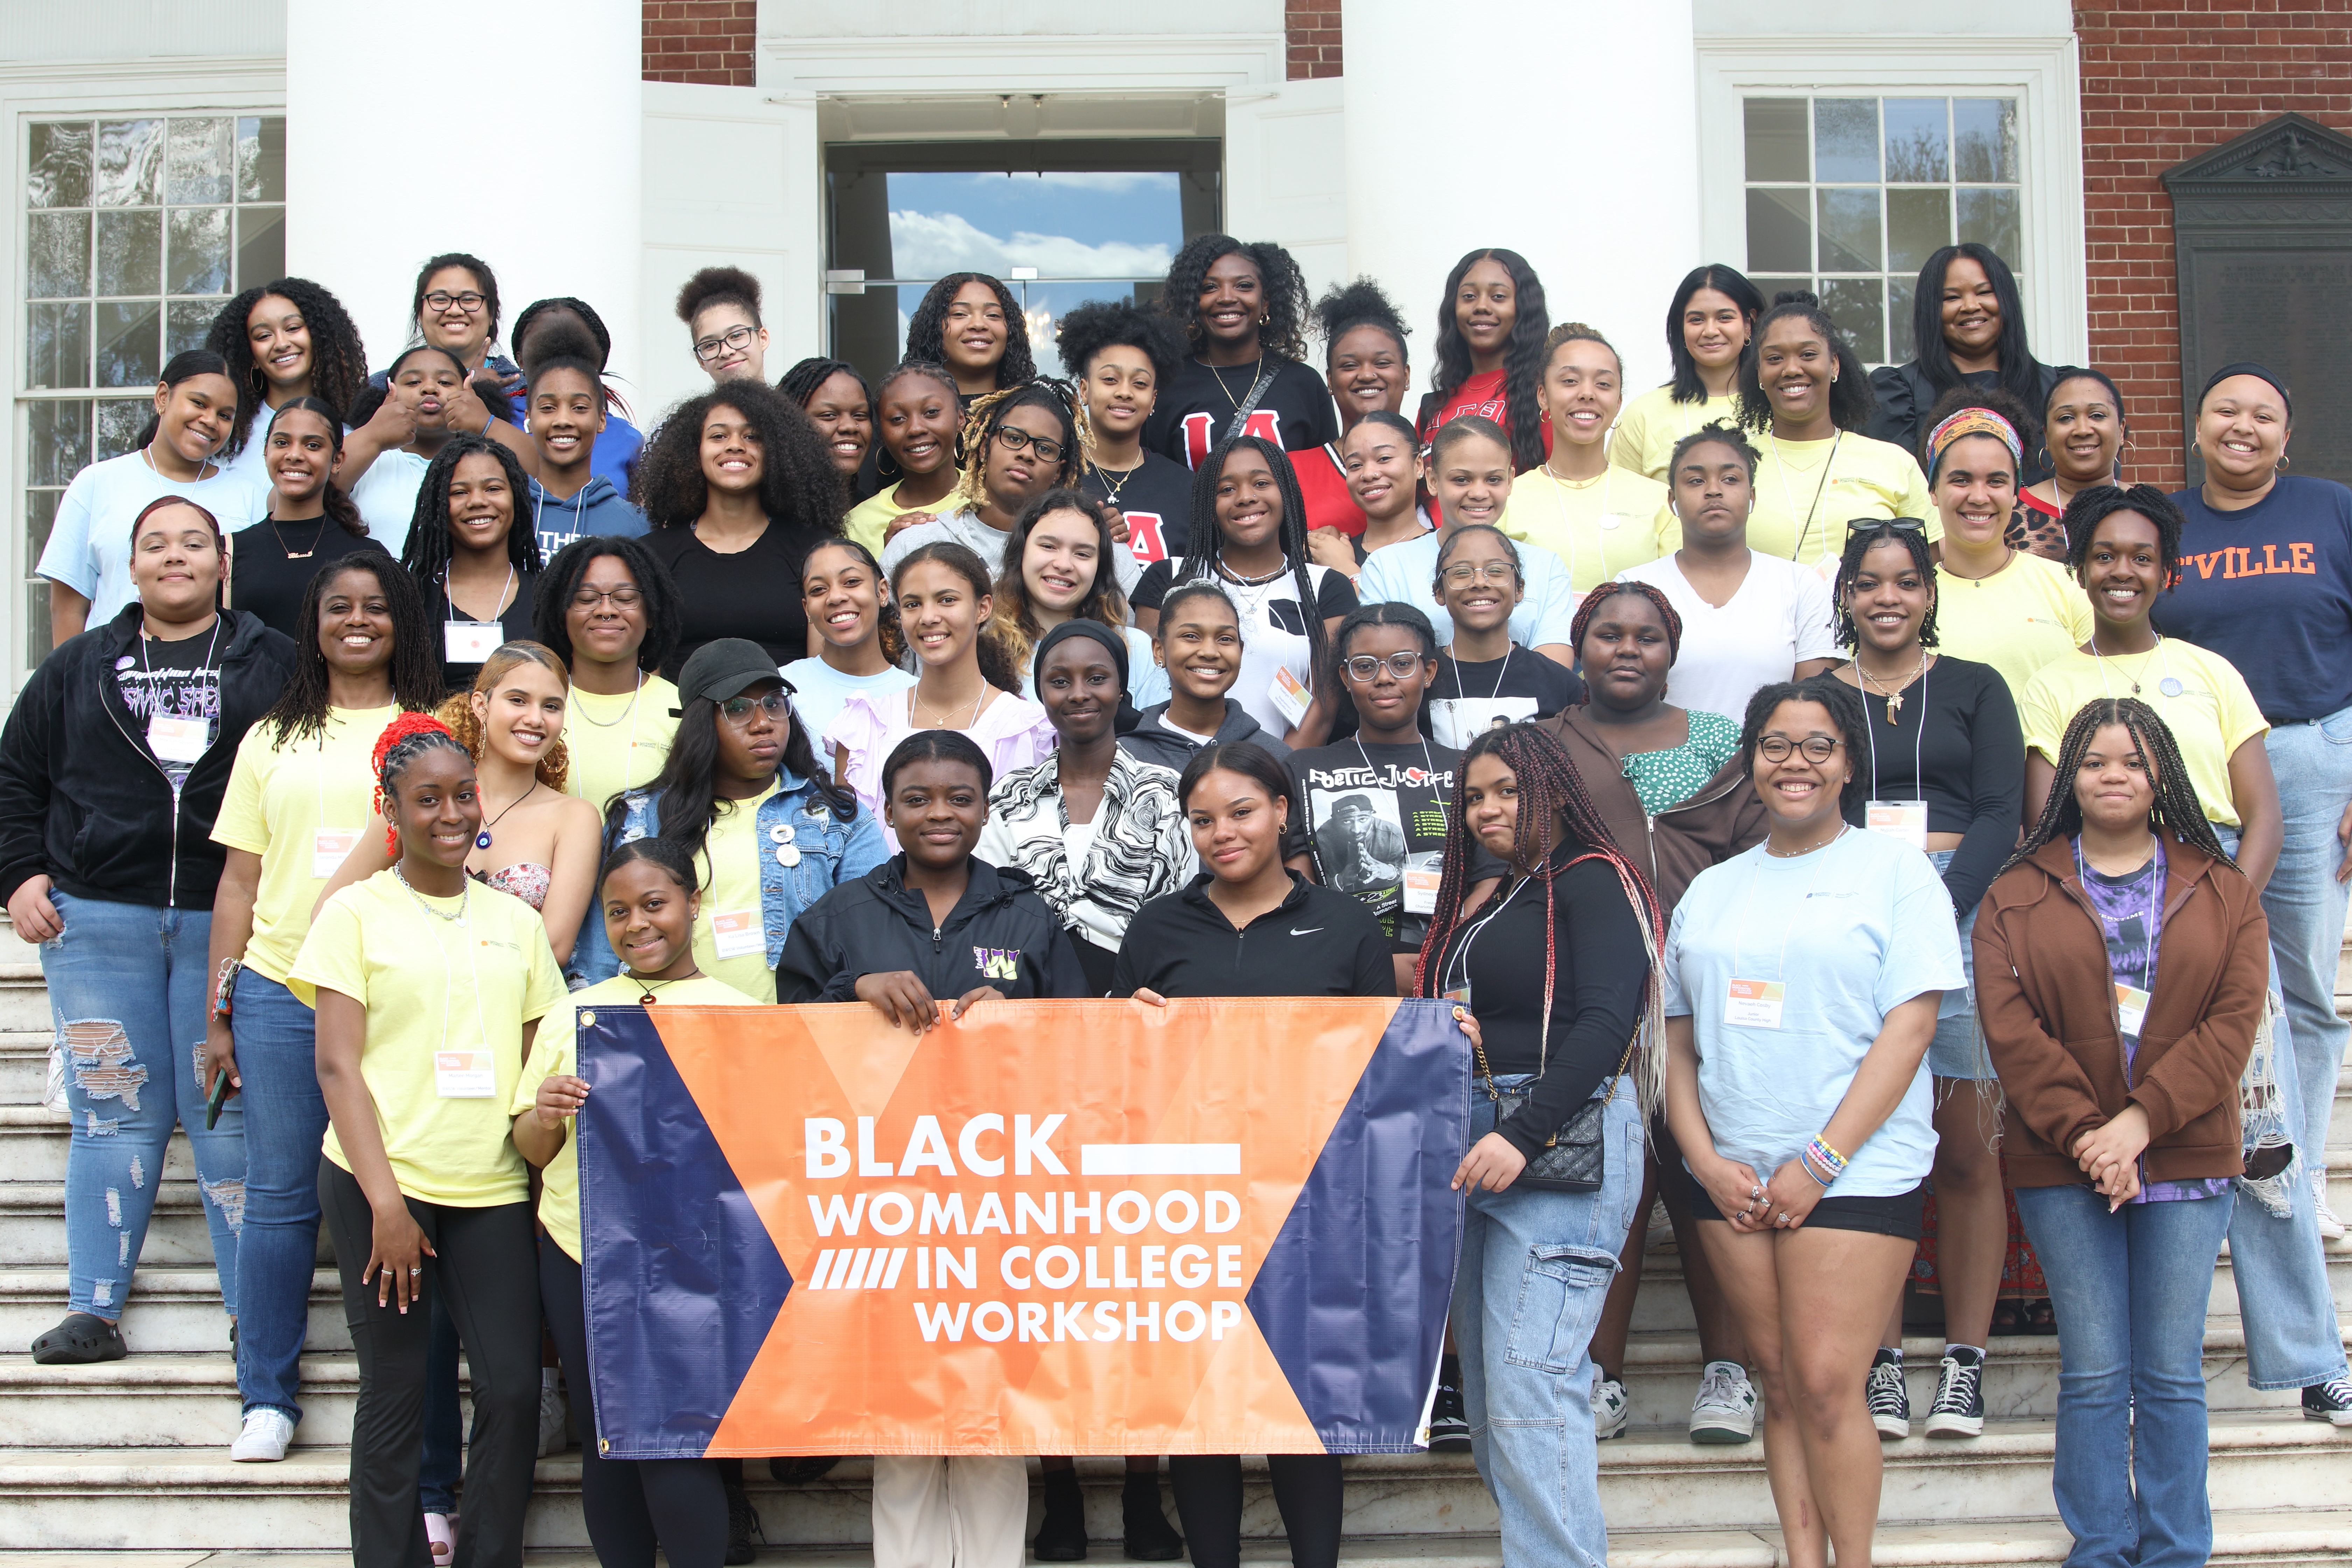 Group of women on rotunda steps holding banner that says "Black Womanhood in College Workshop"